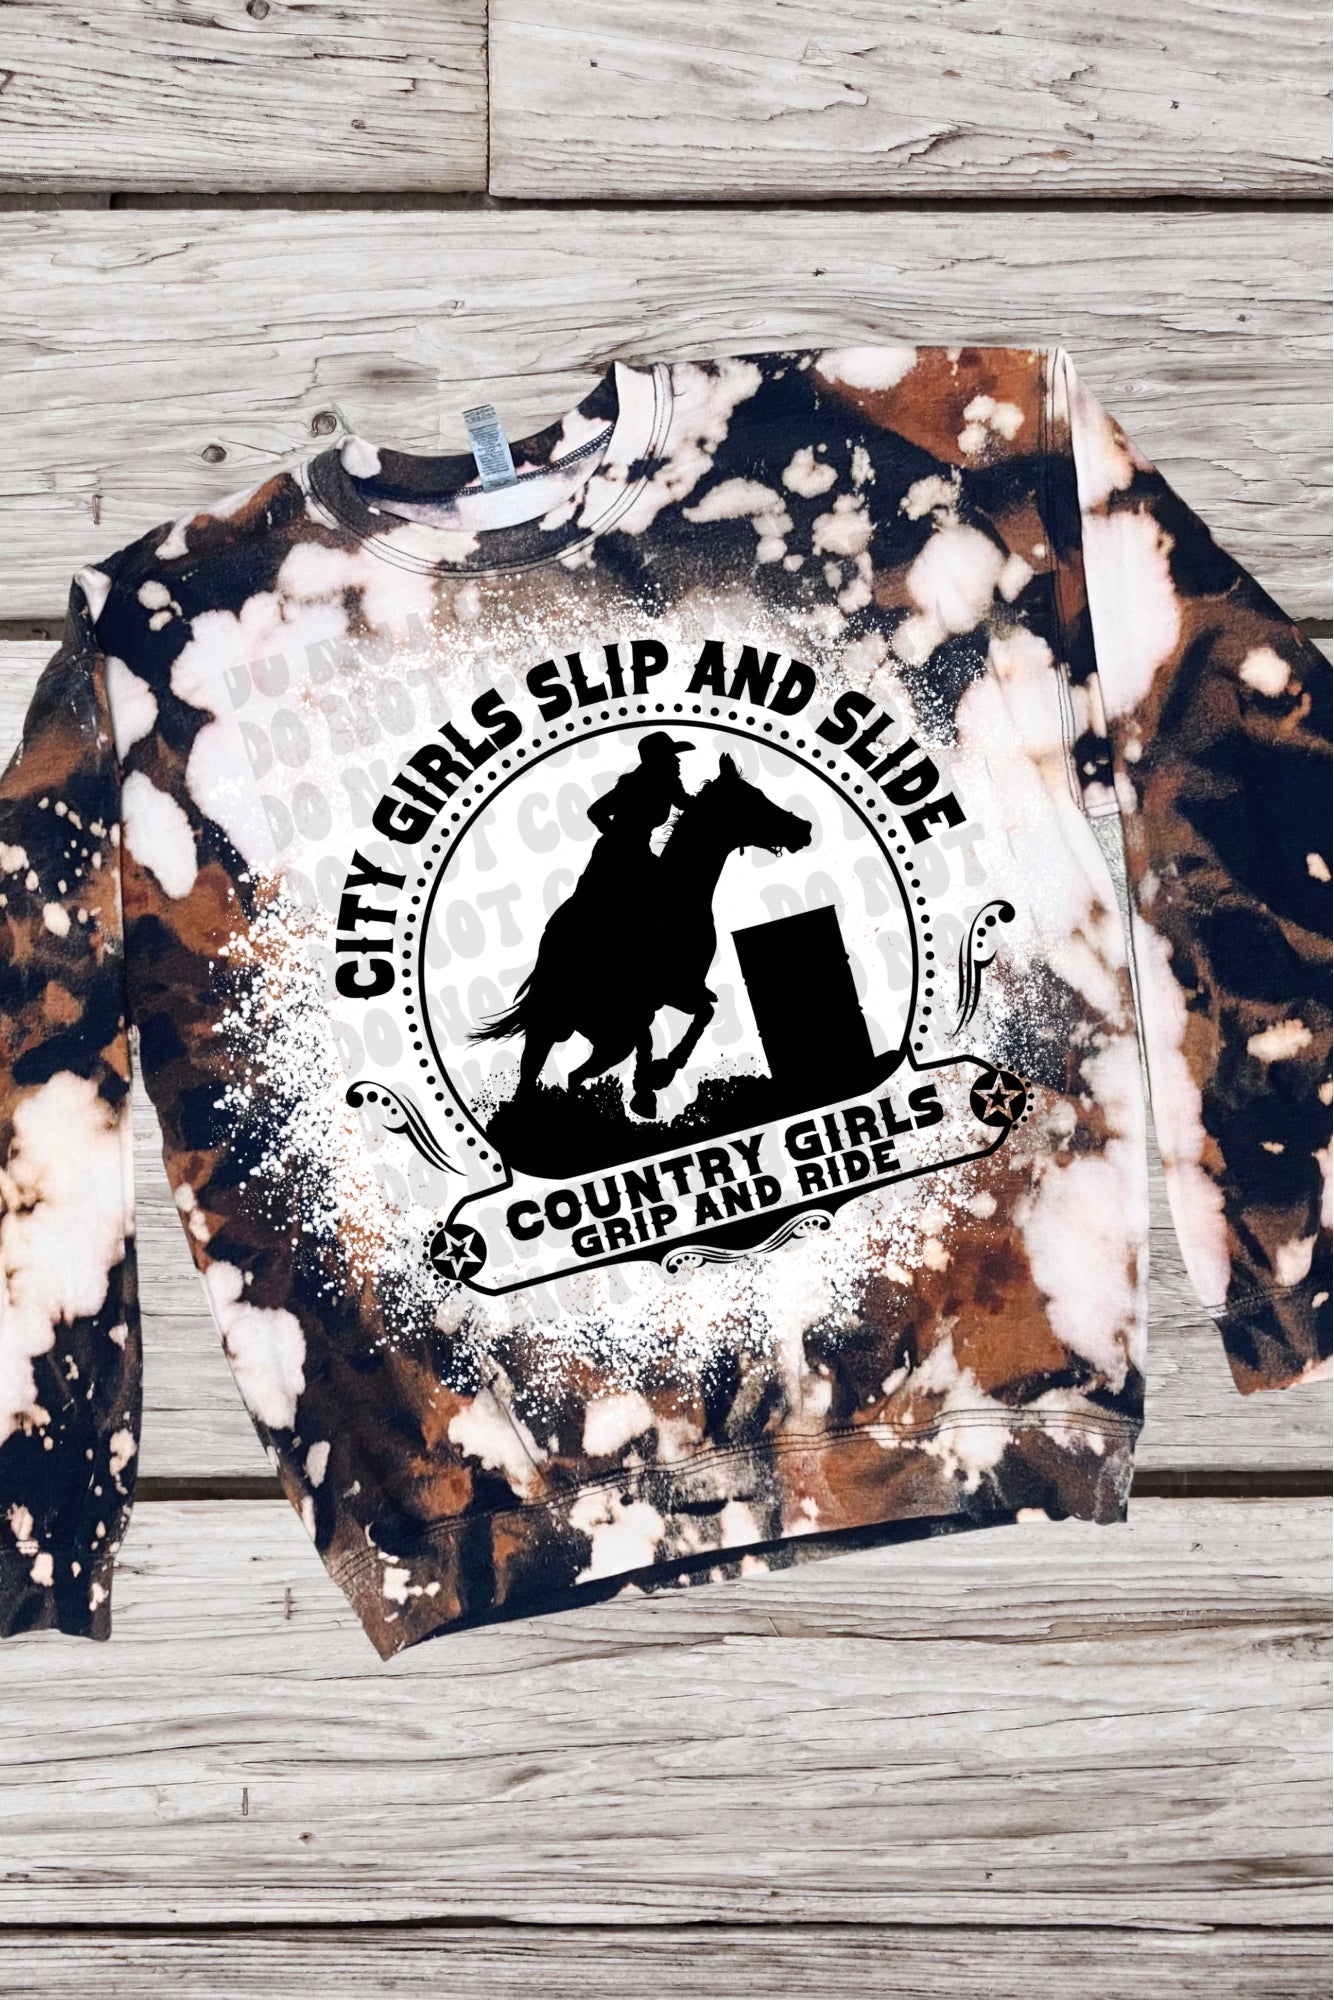 City Girls Slip and Slide, Country Girls Grip and Ride